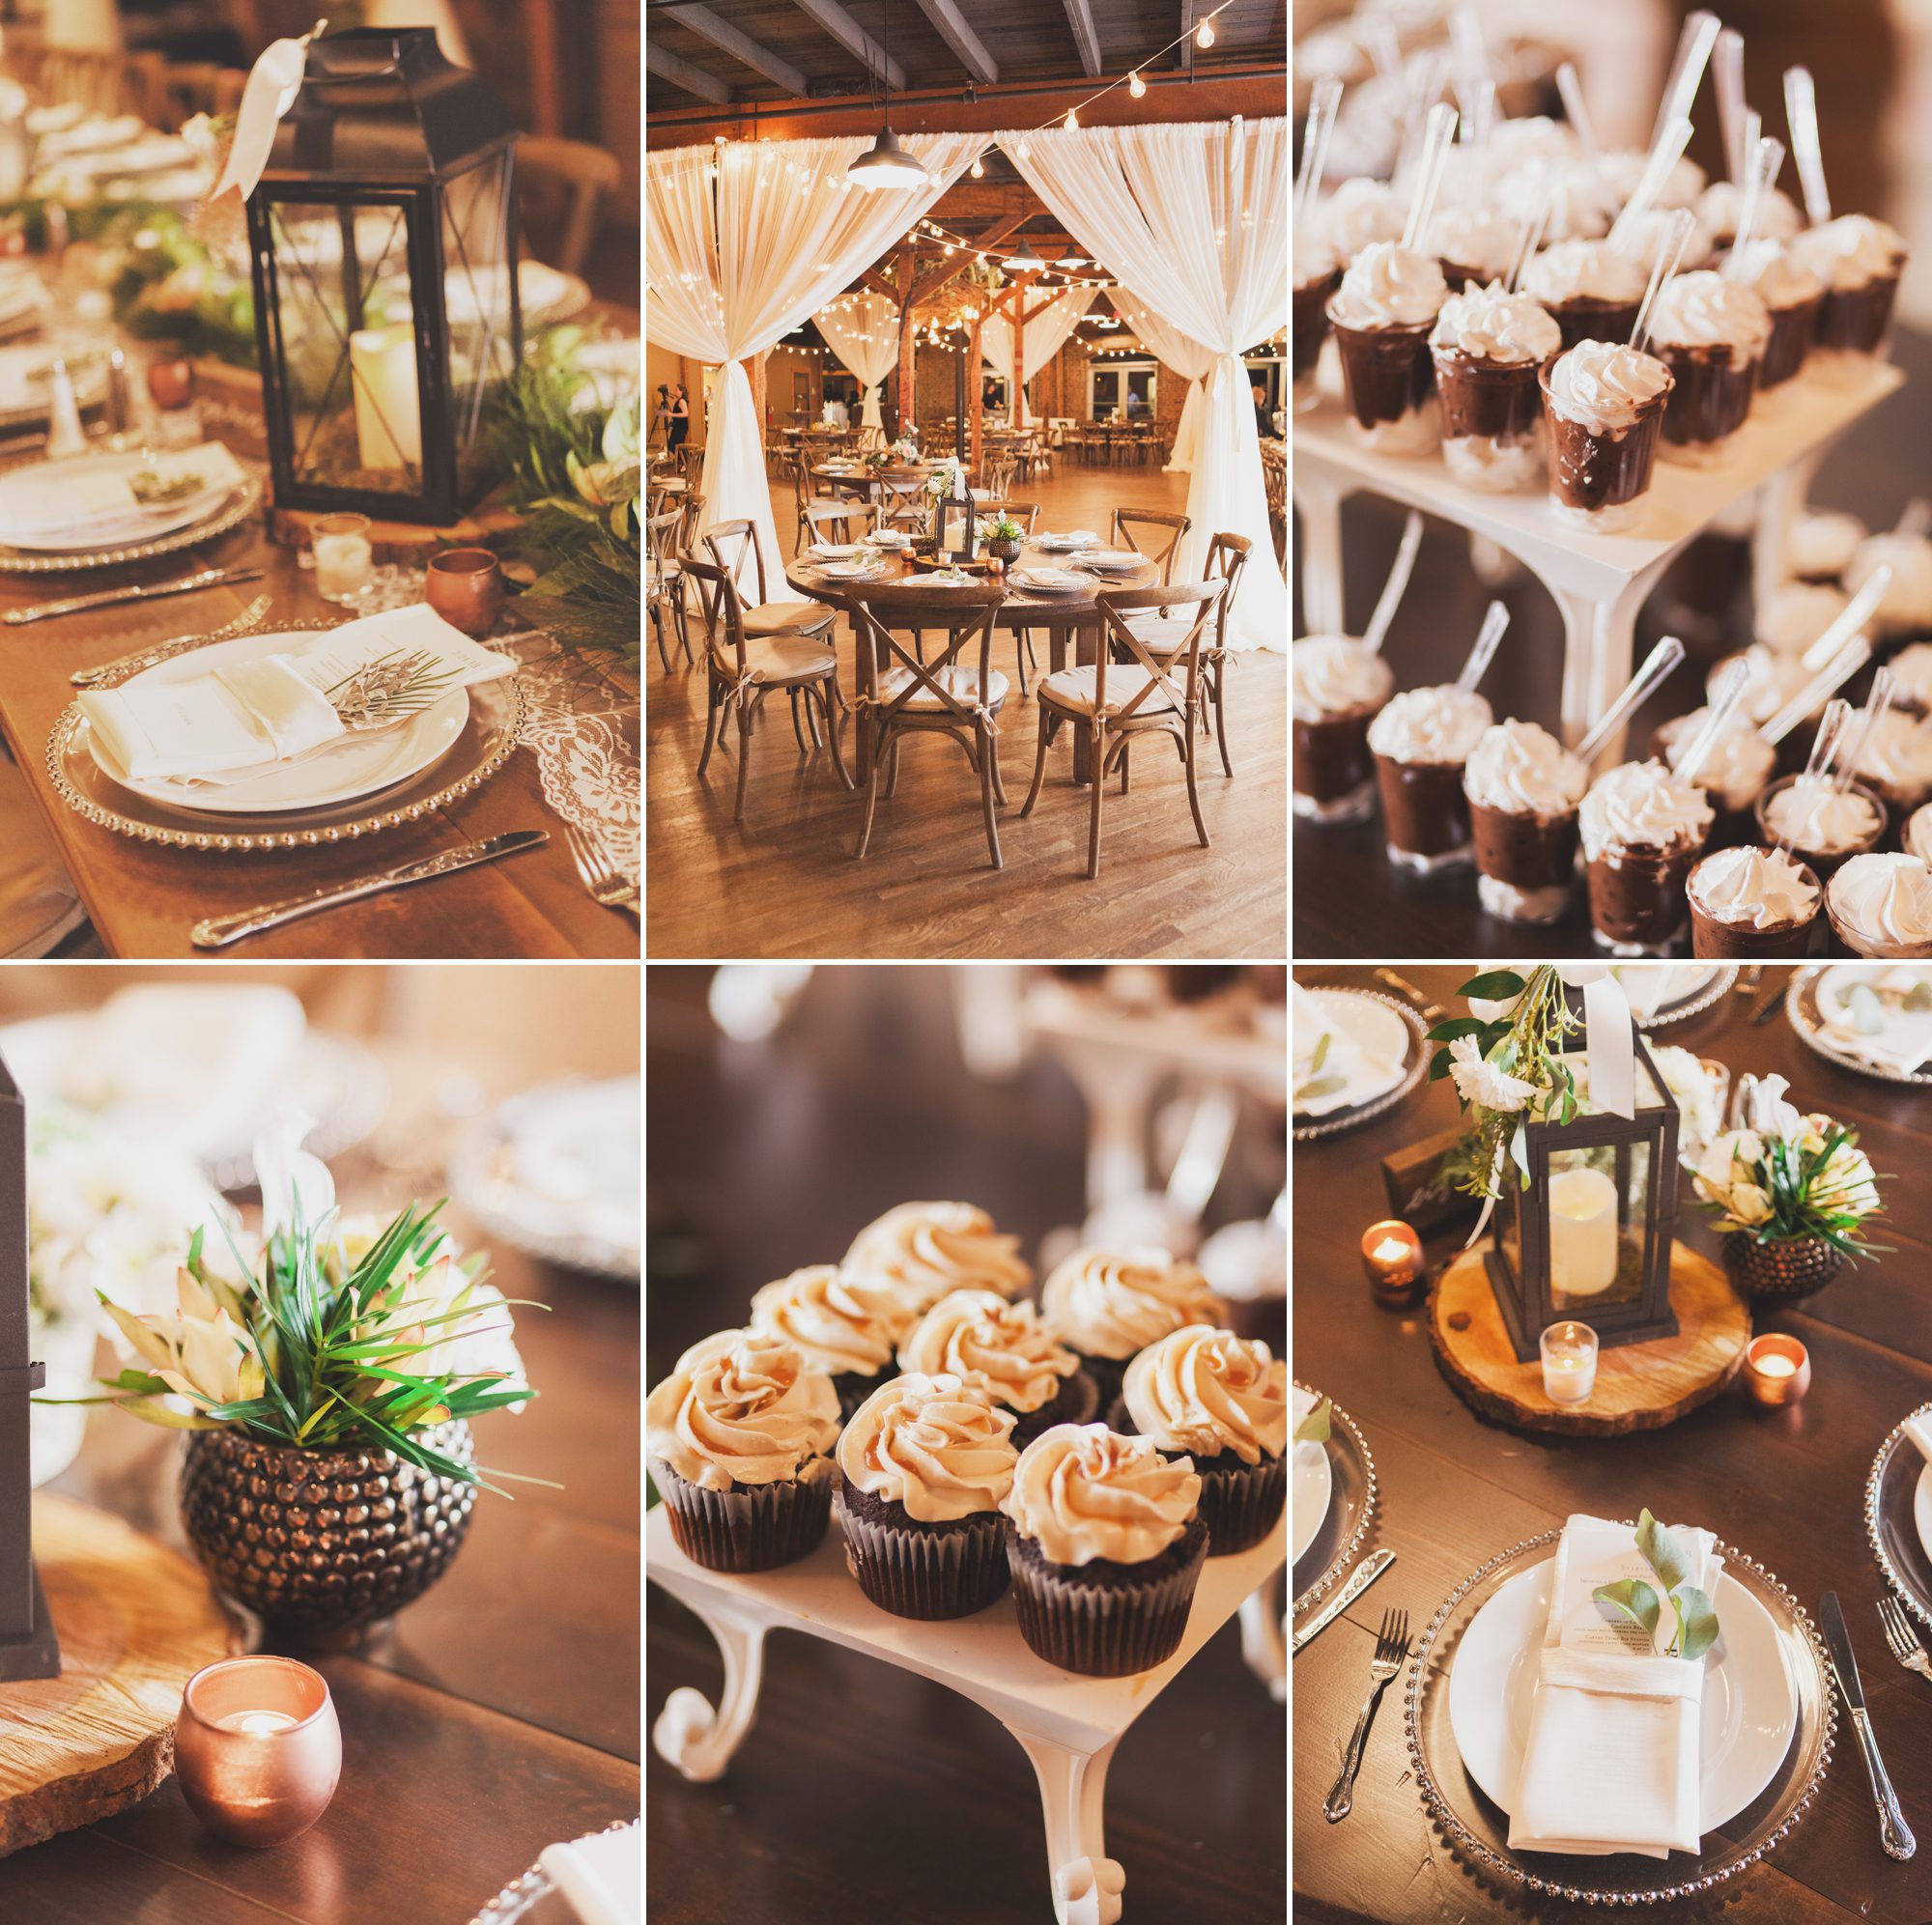 Wedding reception cupcakes and table decor after ceremony  at Houston Station, Nashville TN. Photos by Krista Lee Photography.